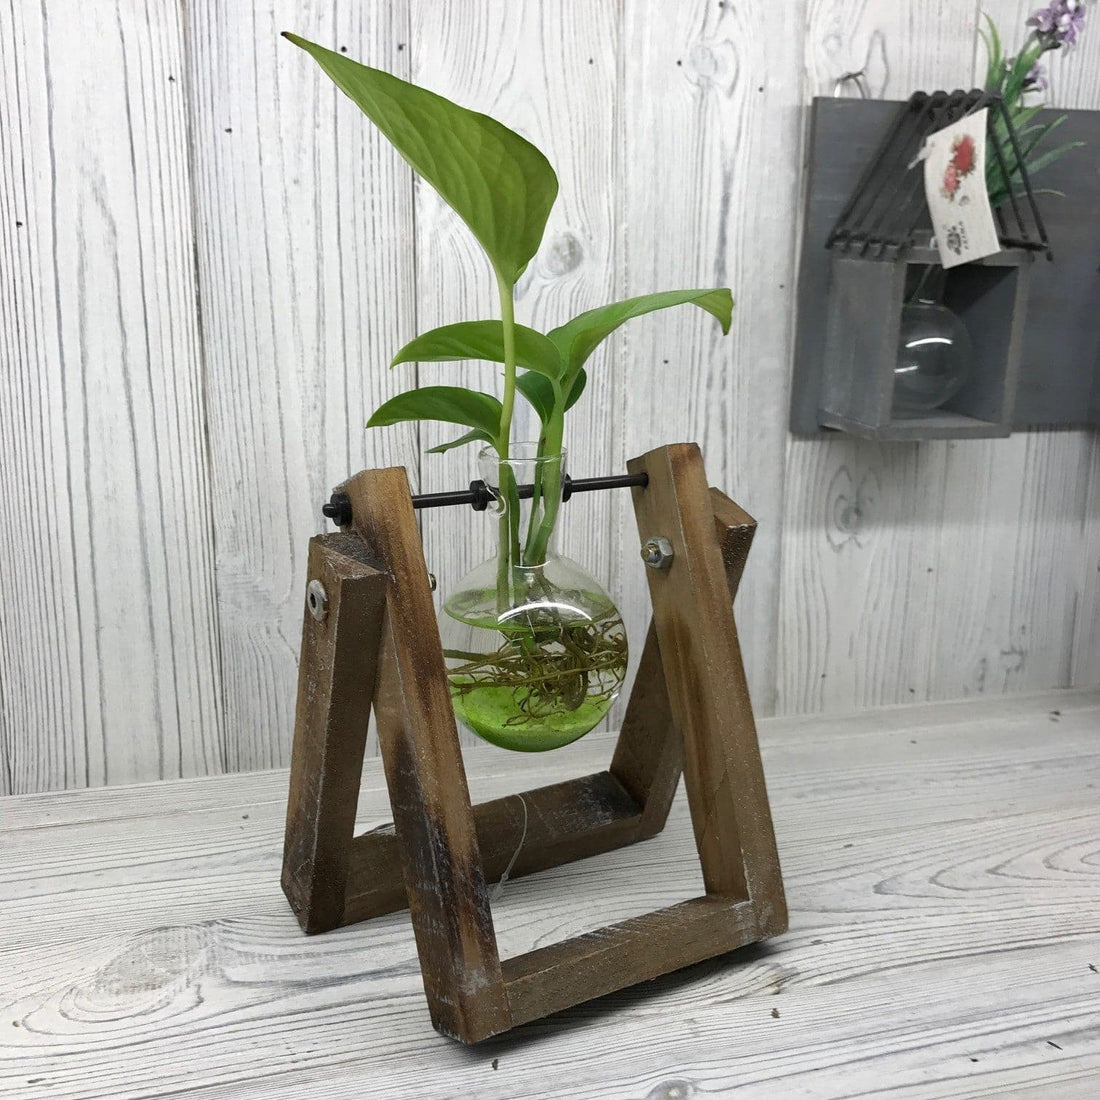 Hydroponic Home Décor - One Pot Wooden Stand - best price from Maltashopper.com HHD-01